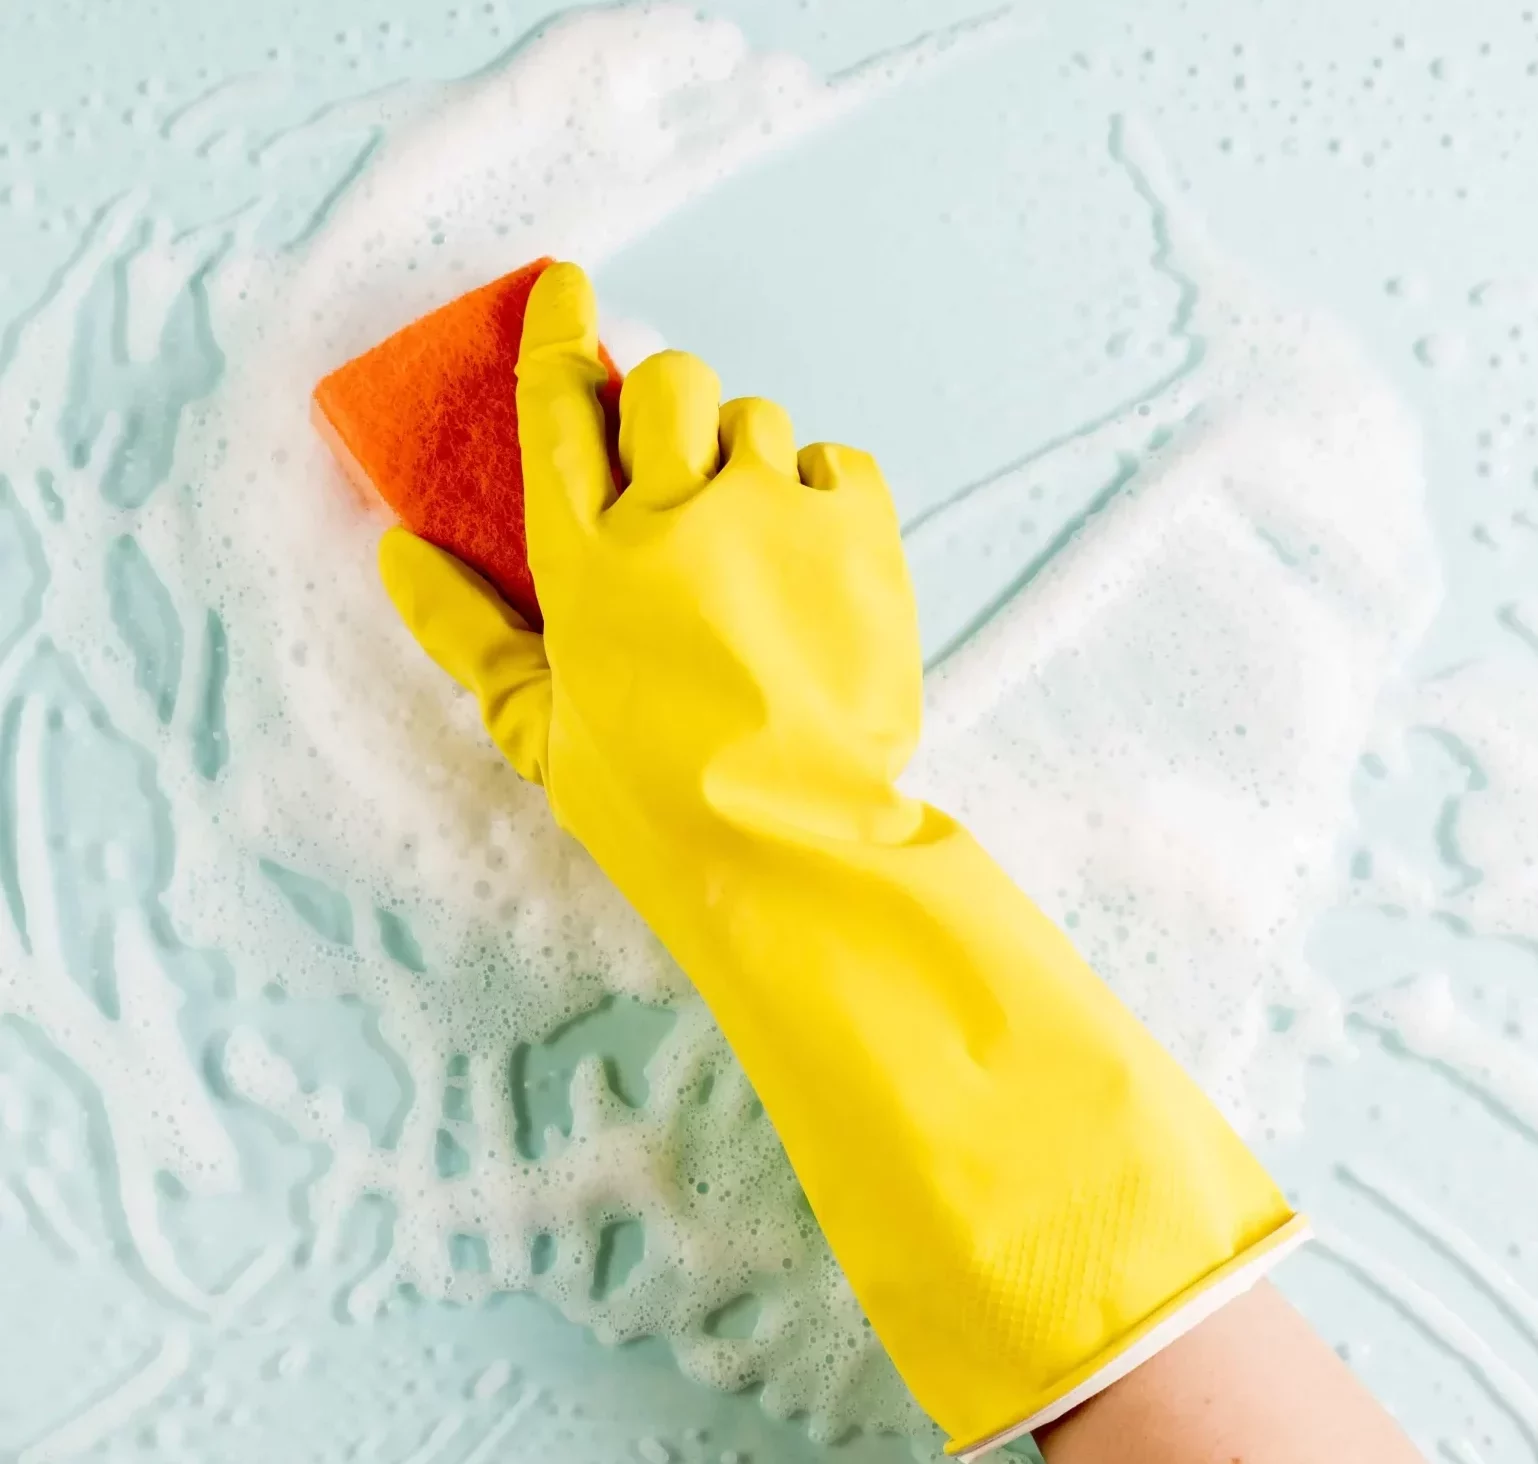 hand wearing yellow cleaning gloves holding a sponge to clean a surface with foam and suds